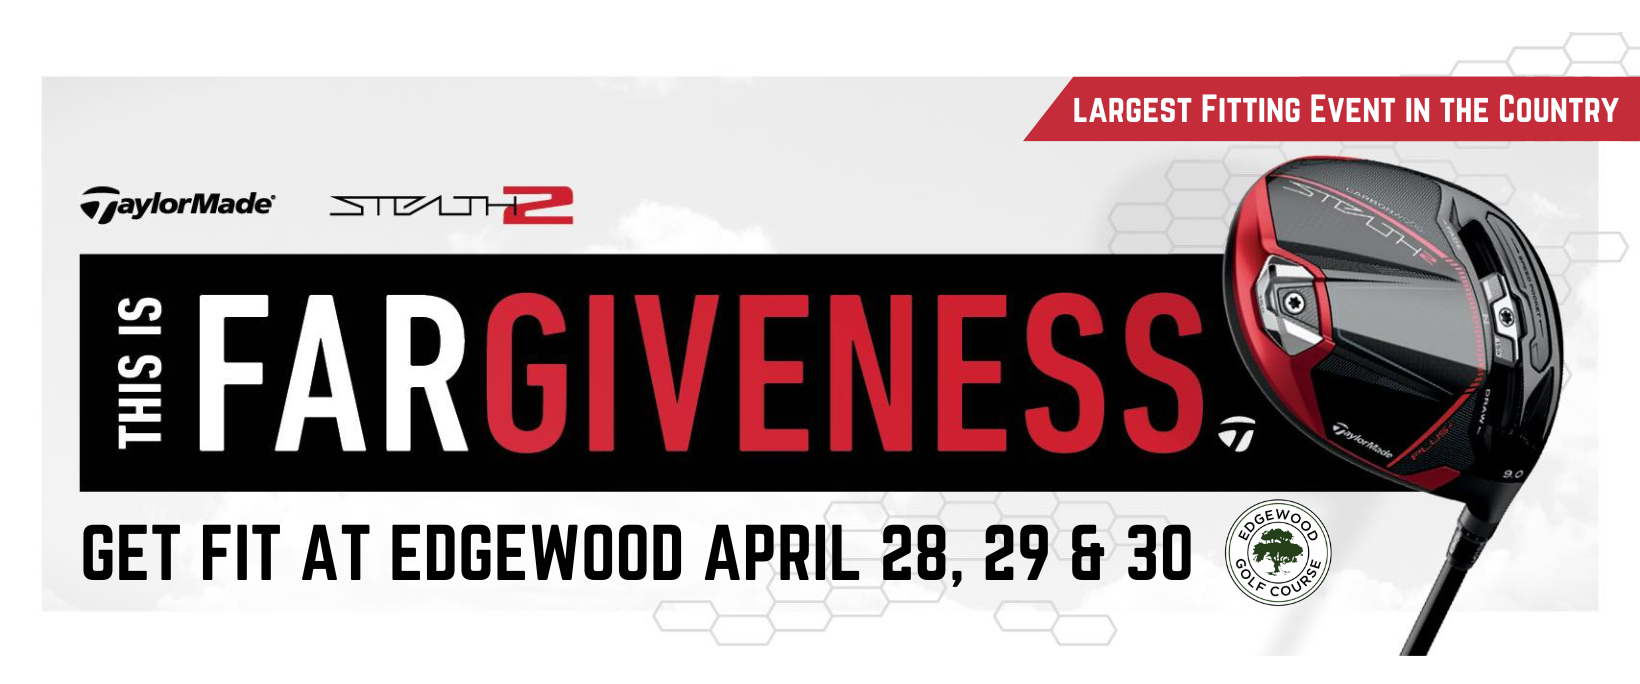 TaylorMade Takeover April 28-30